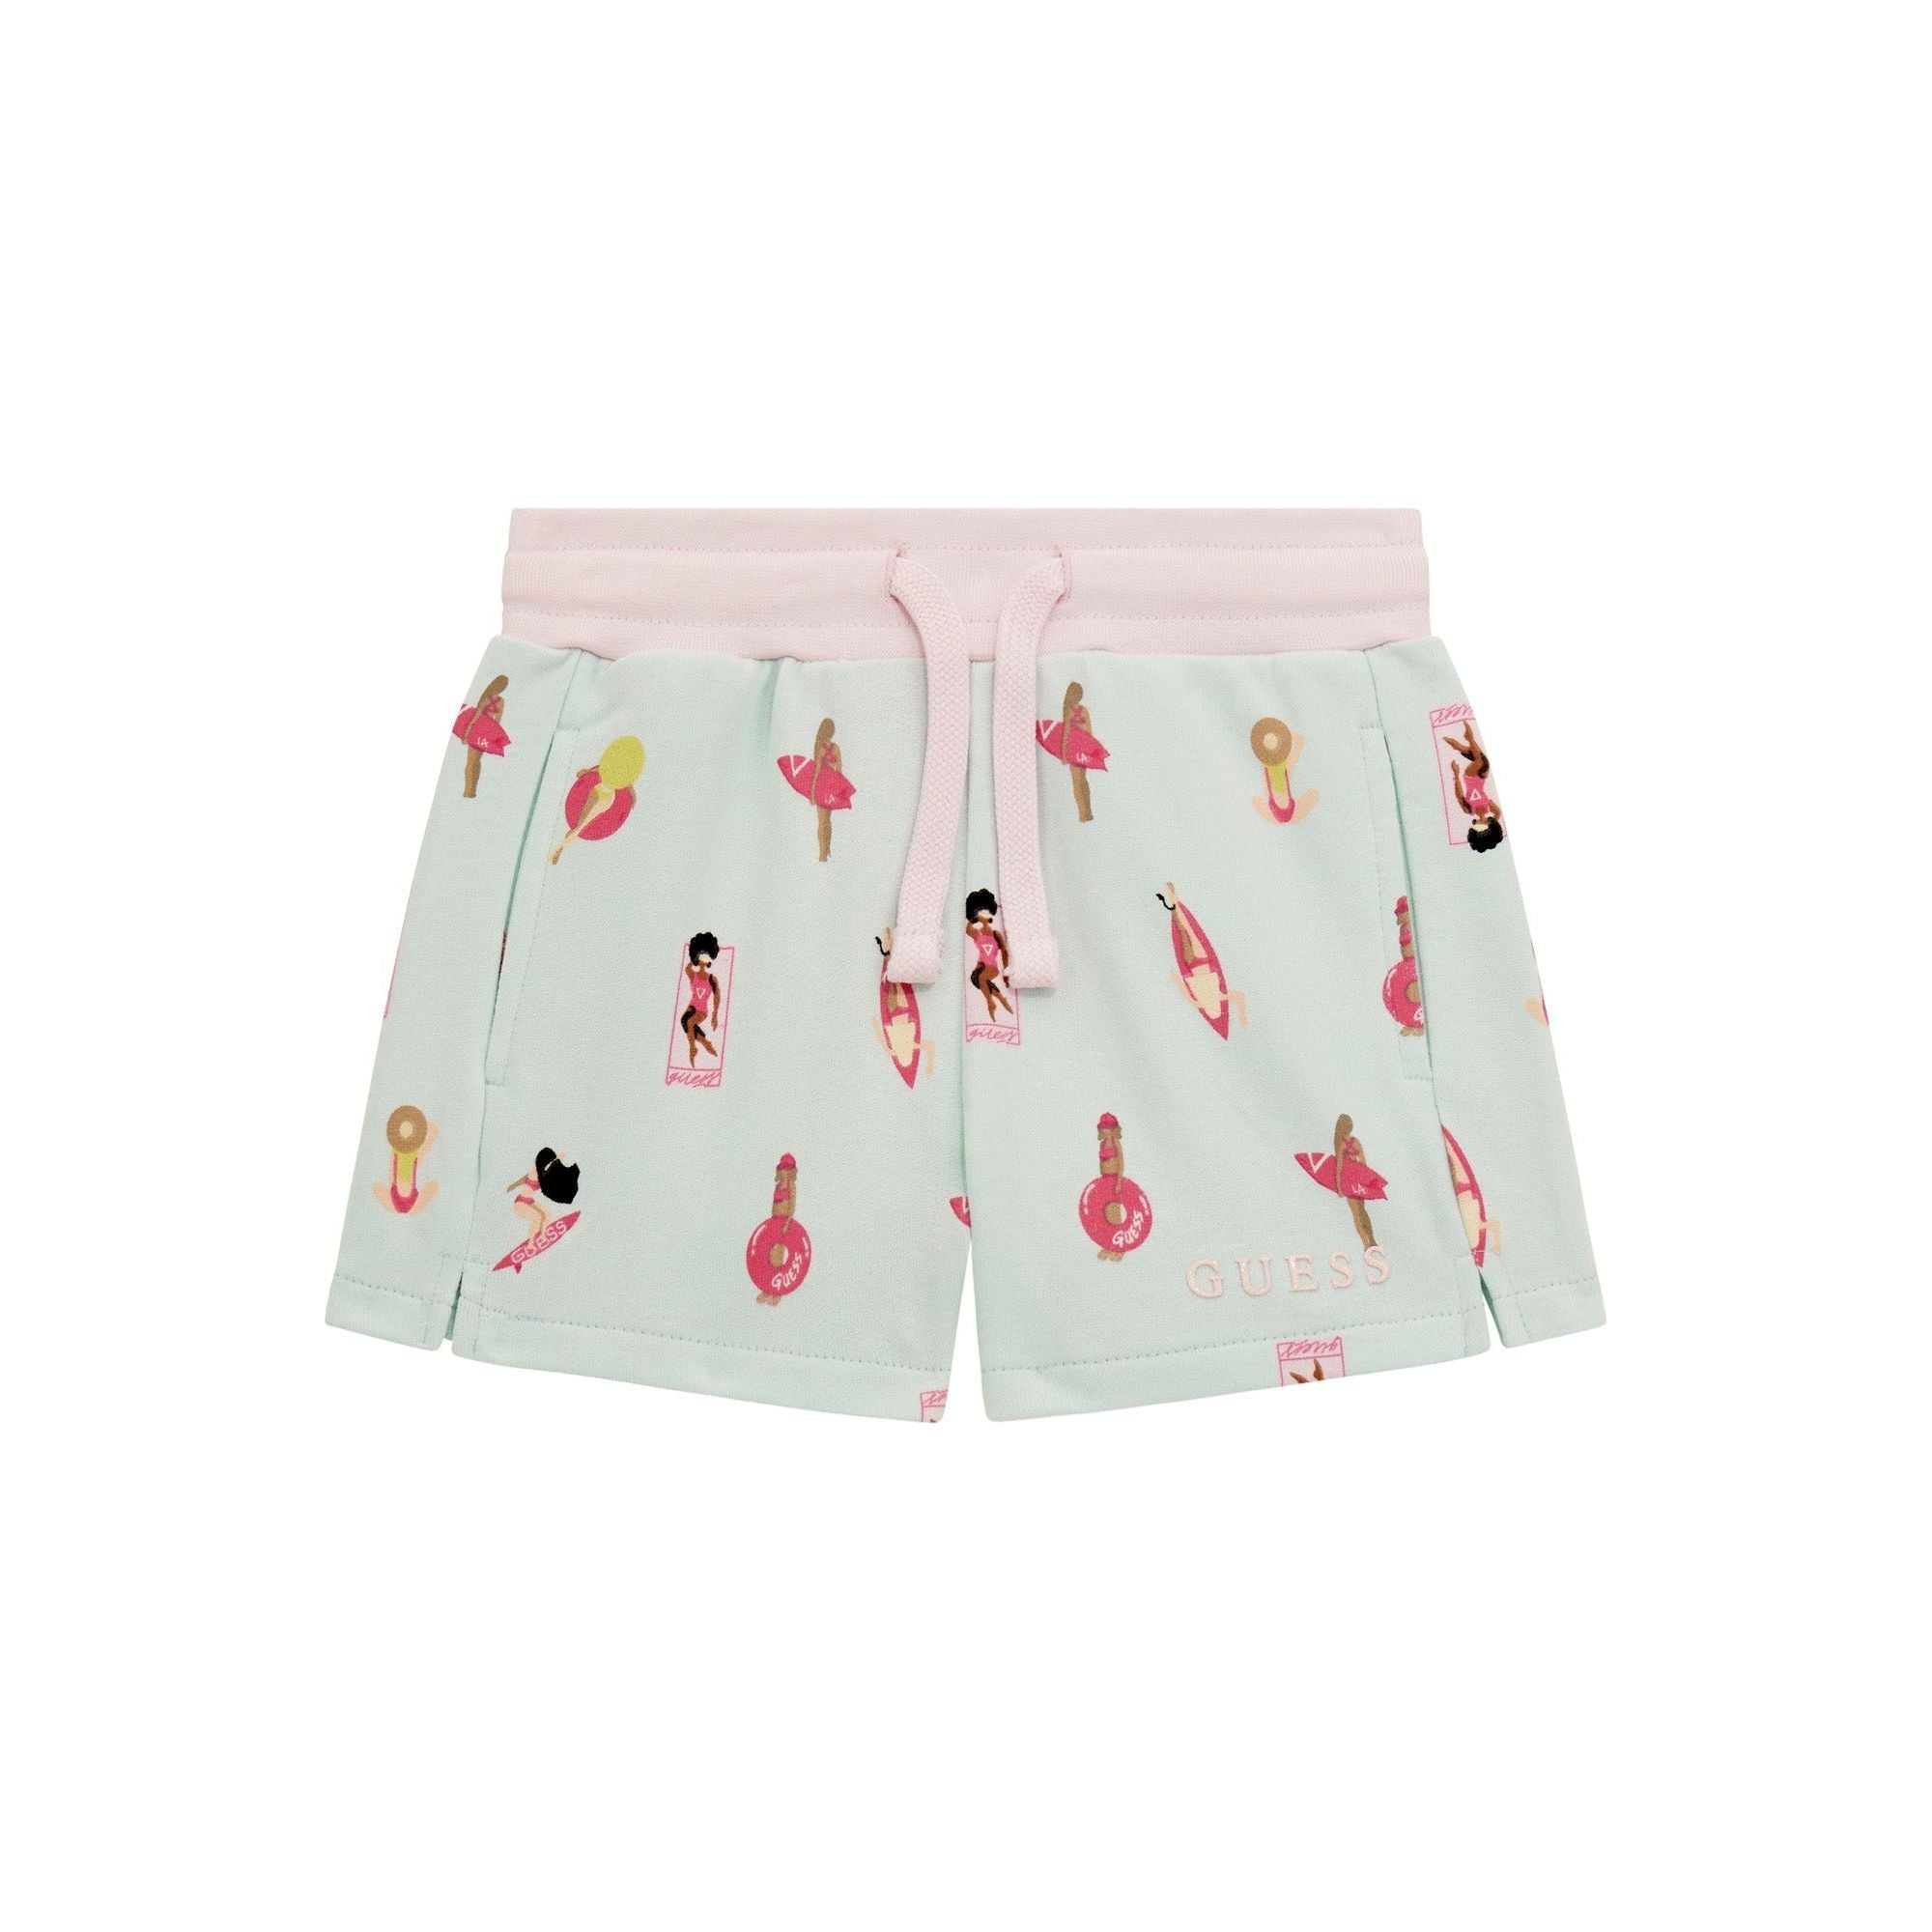 Guess - Toddler Girls Active Shorts in Summer Days